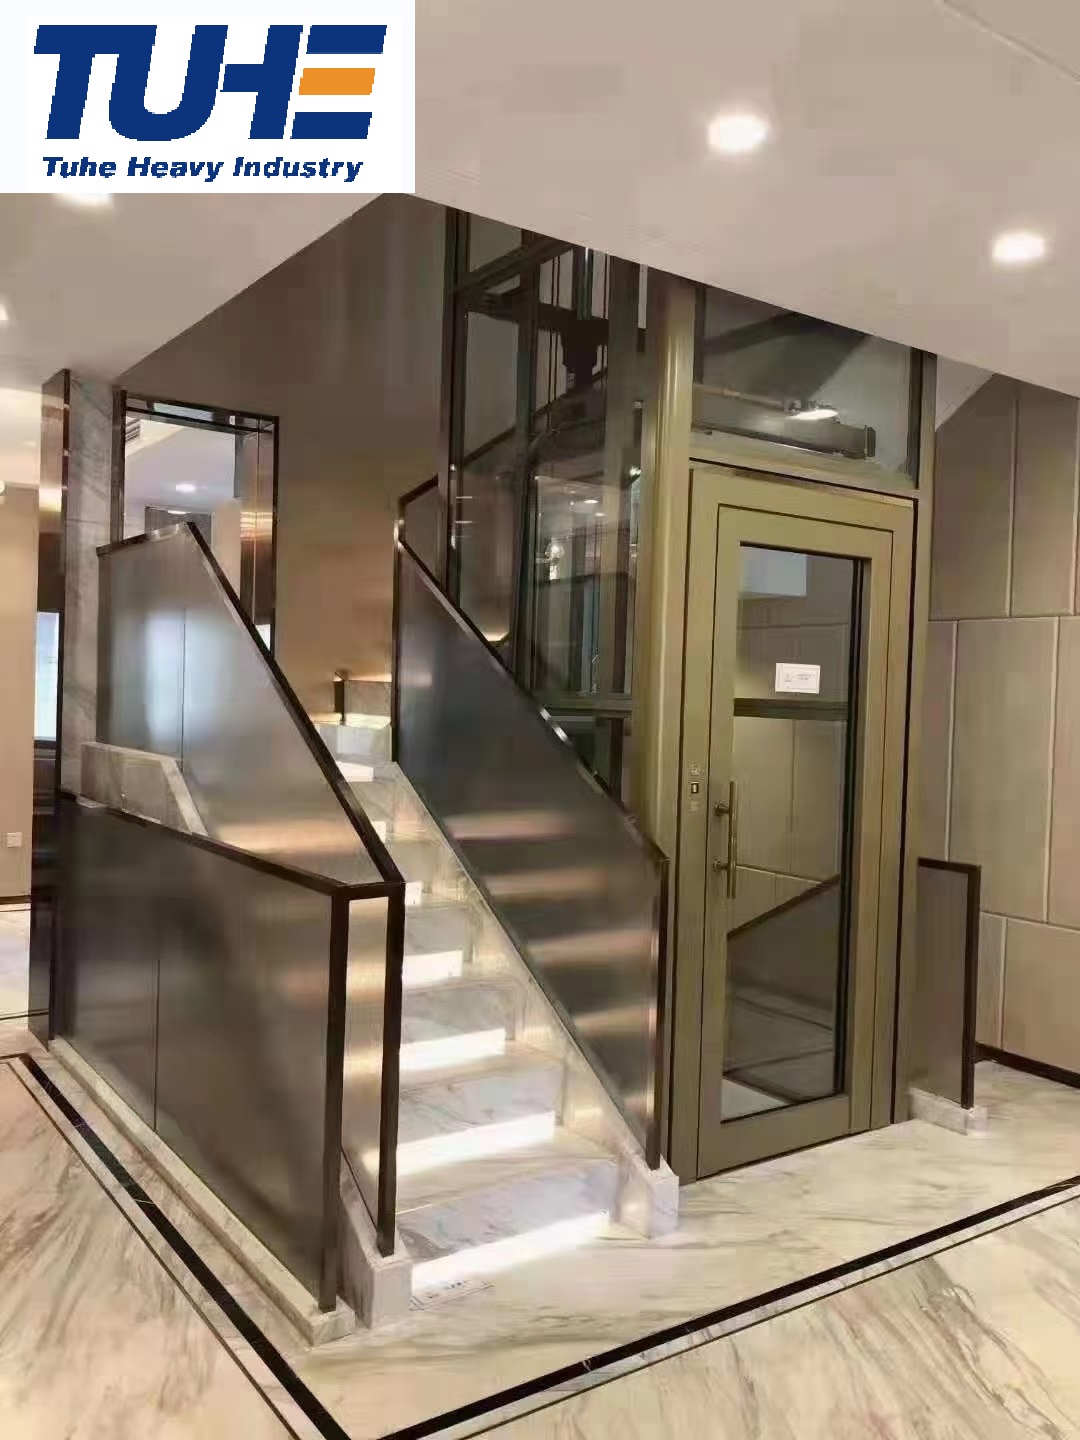 Small elevators for homes UK